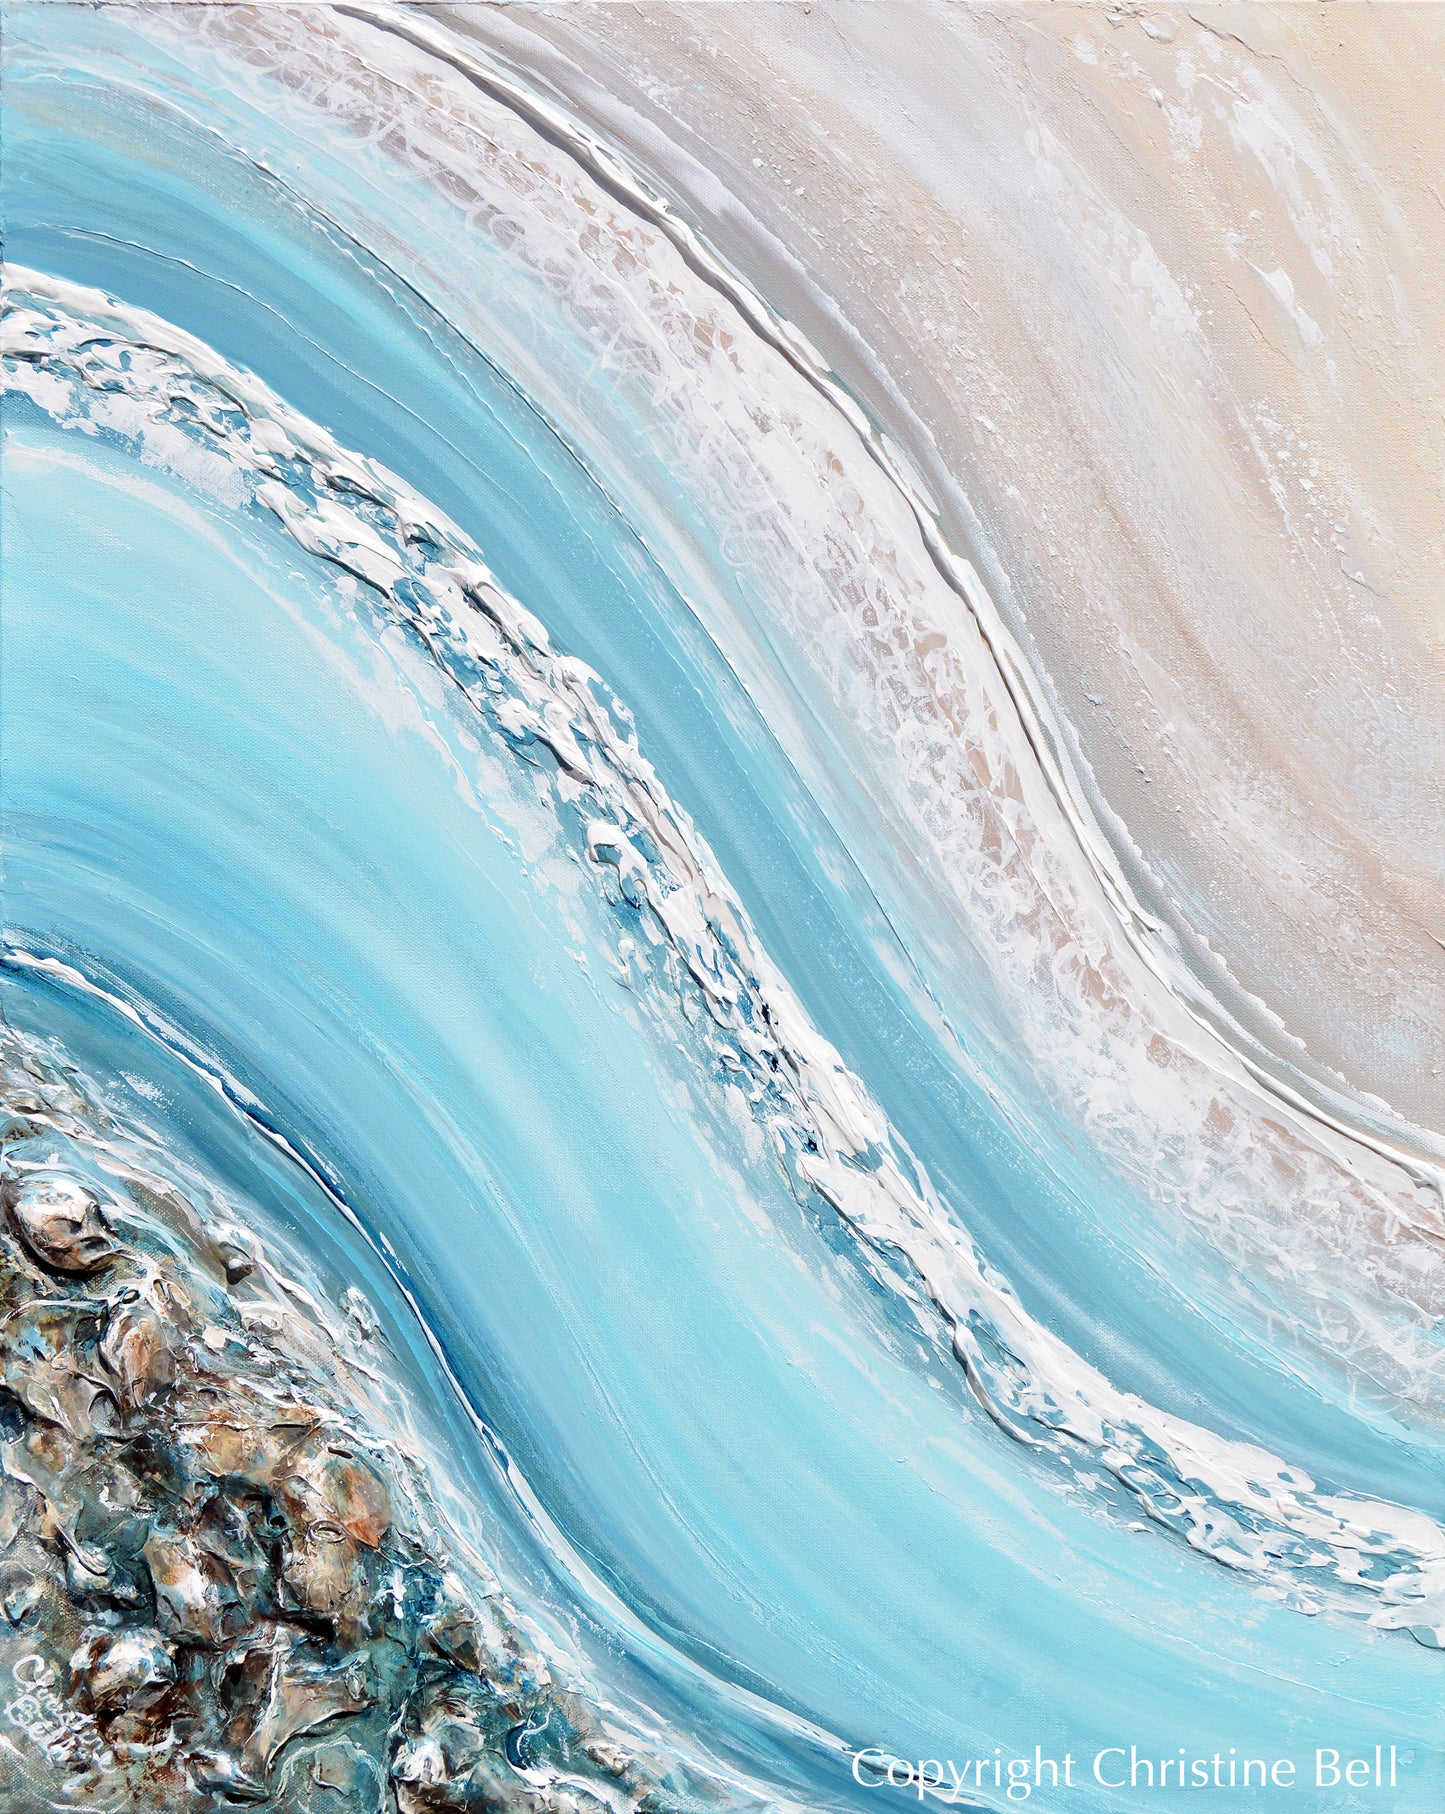 "Above the Waves" ORIGINAL Art Coastal Abstract Painting Textured Ocean Waves Rocks Aerial Beach Turquoise Blue 24x30"